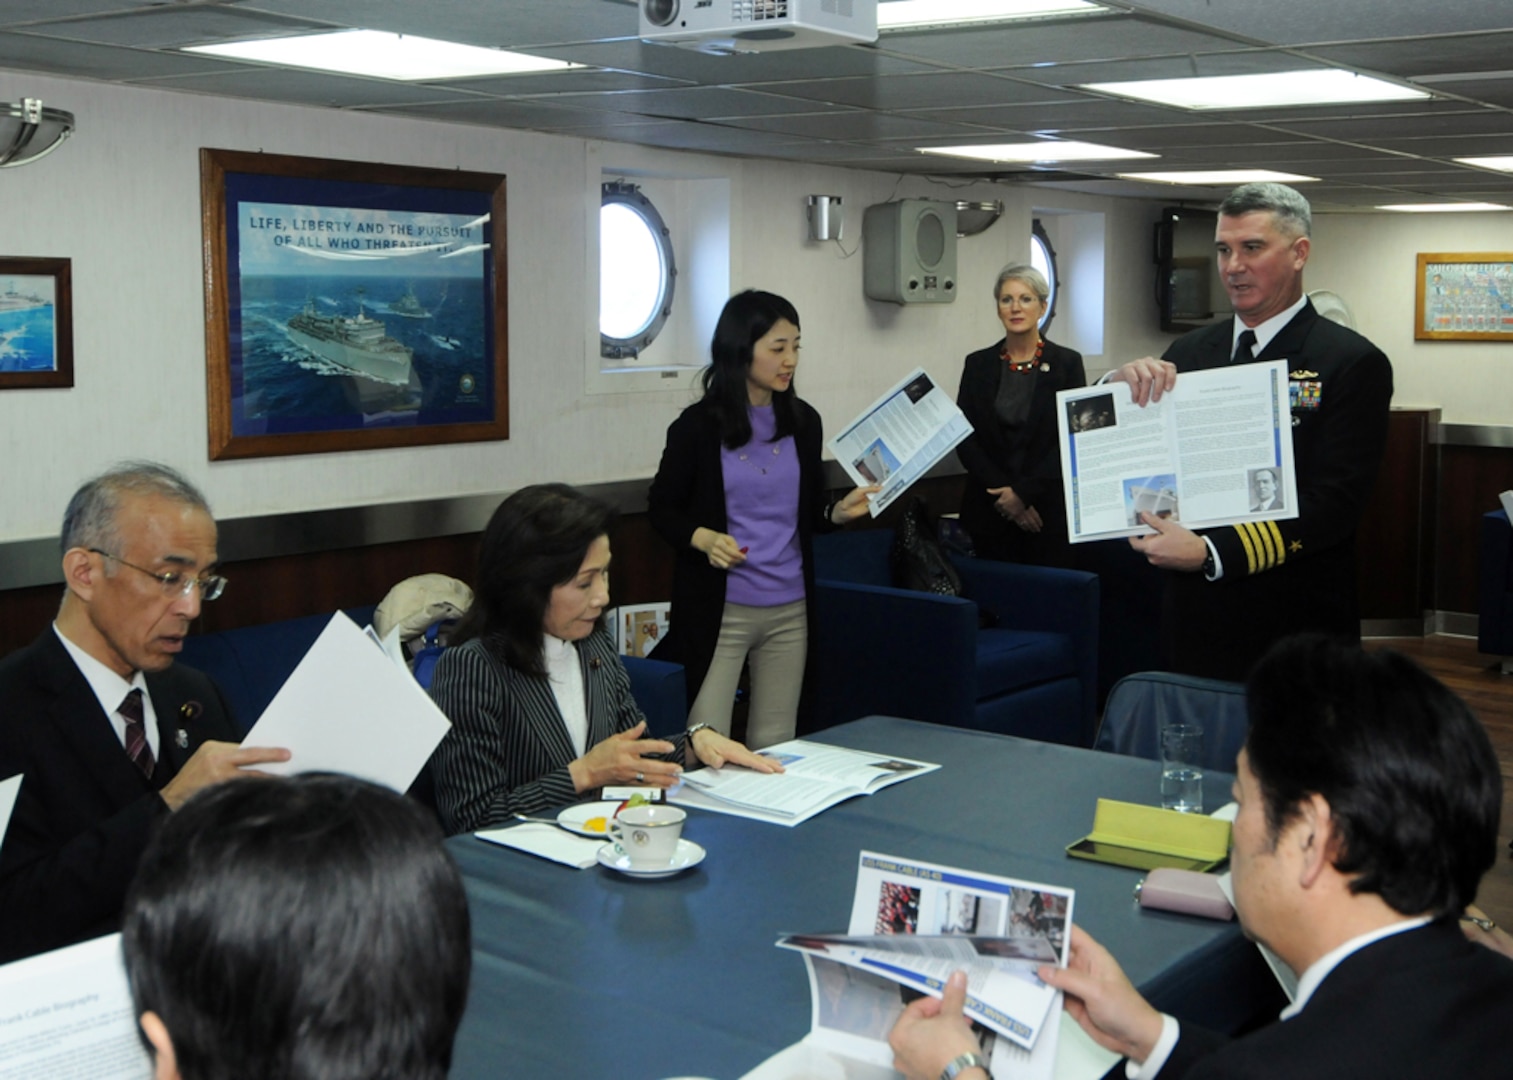 SASEBO, Japan (Mar. 2, 2015) - Capt. Mark Benjamin, right, commanding officer of the submarine tender USS Frank Cable (AS 40), explains his ship's history, capabilities, and functions to members of the Japanese House of Councilors (JHC). The members of the JHC came aboard to acquire knowledge about the role and function of the ships and facilities of Sasebo to aid in discussing issues related to the Japan-US alliance. Frank Cable, deployed to the island of Guam, conducts maintenance and support of submarines and surface vessels deployed to the U.S. 7th Fleet area of responsibility. 